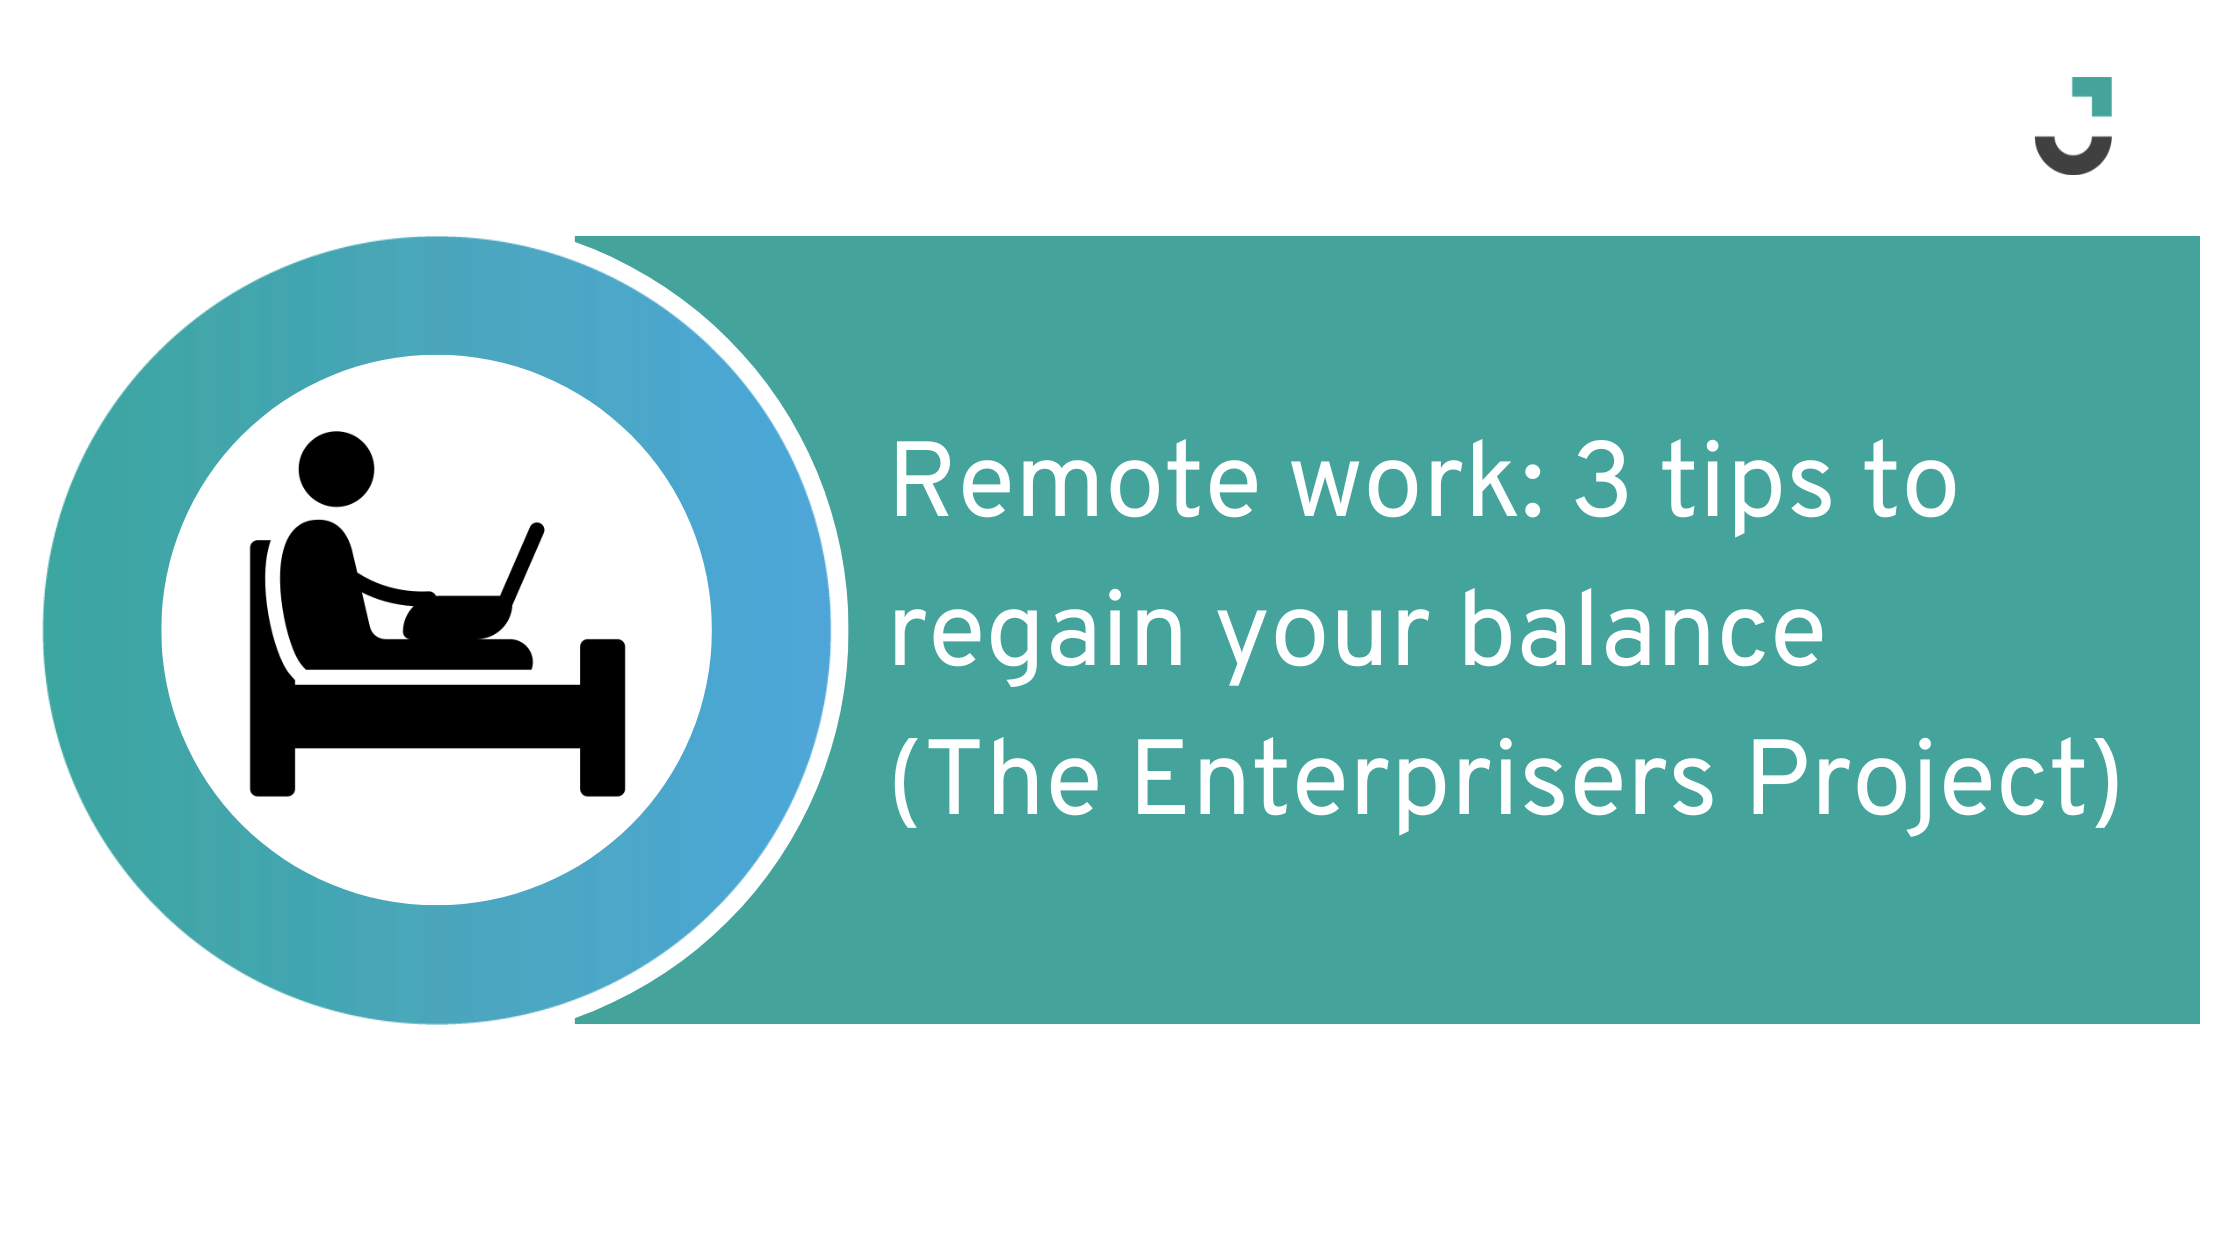 Remote work: 3 tips to regain your balance (The Enterprisers Project)